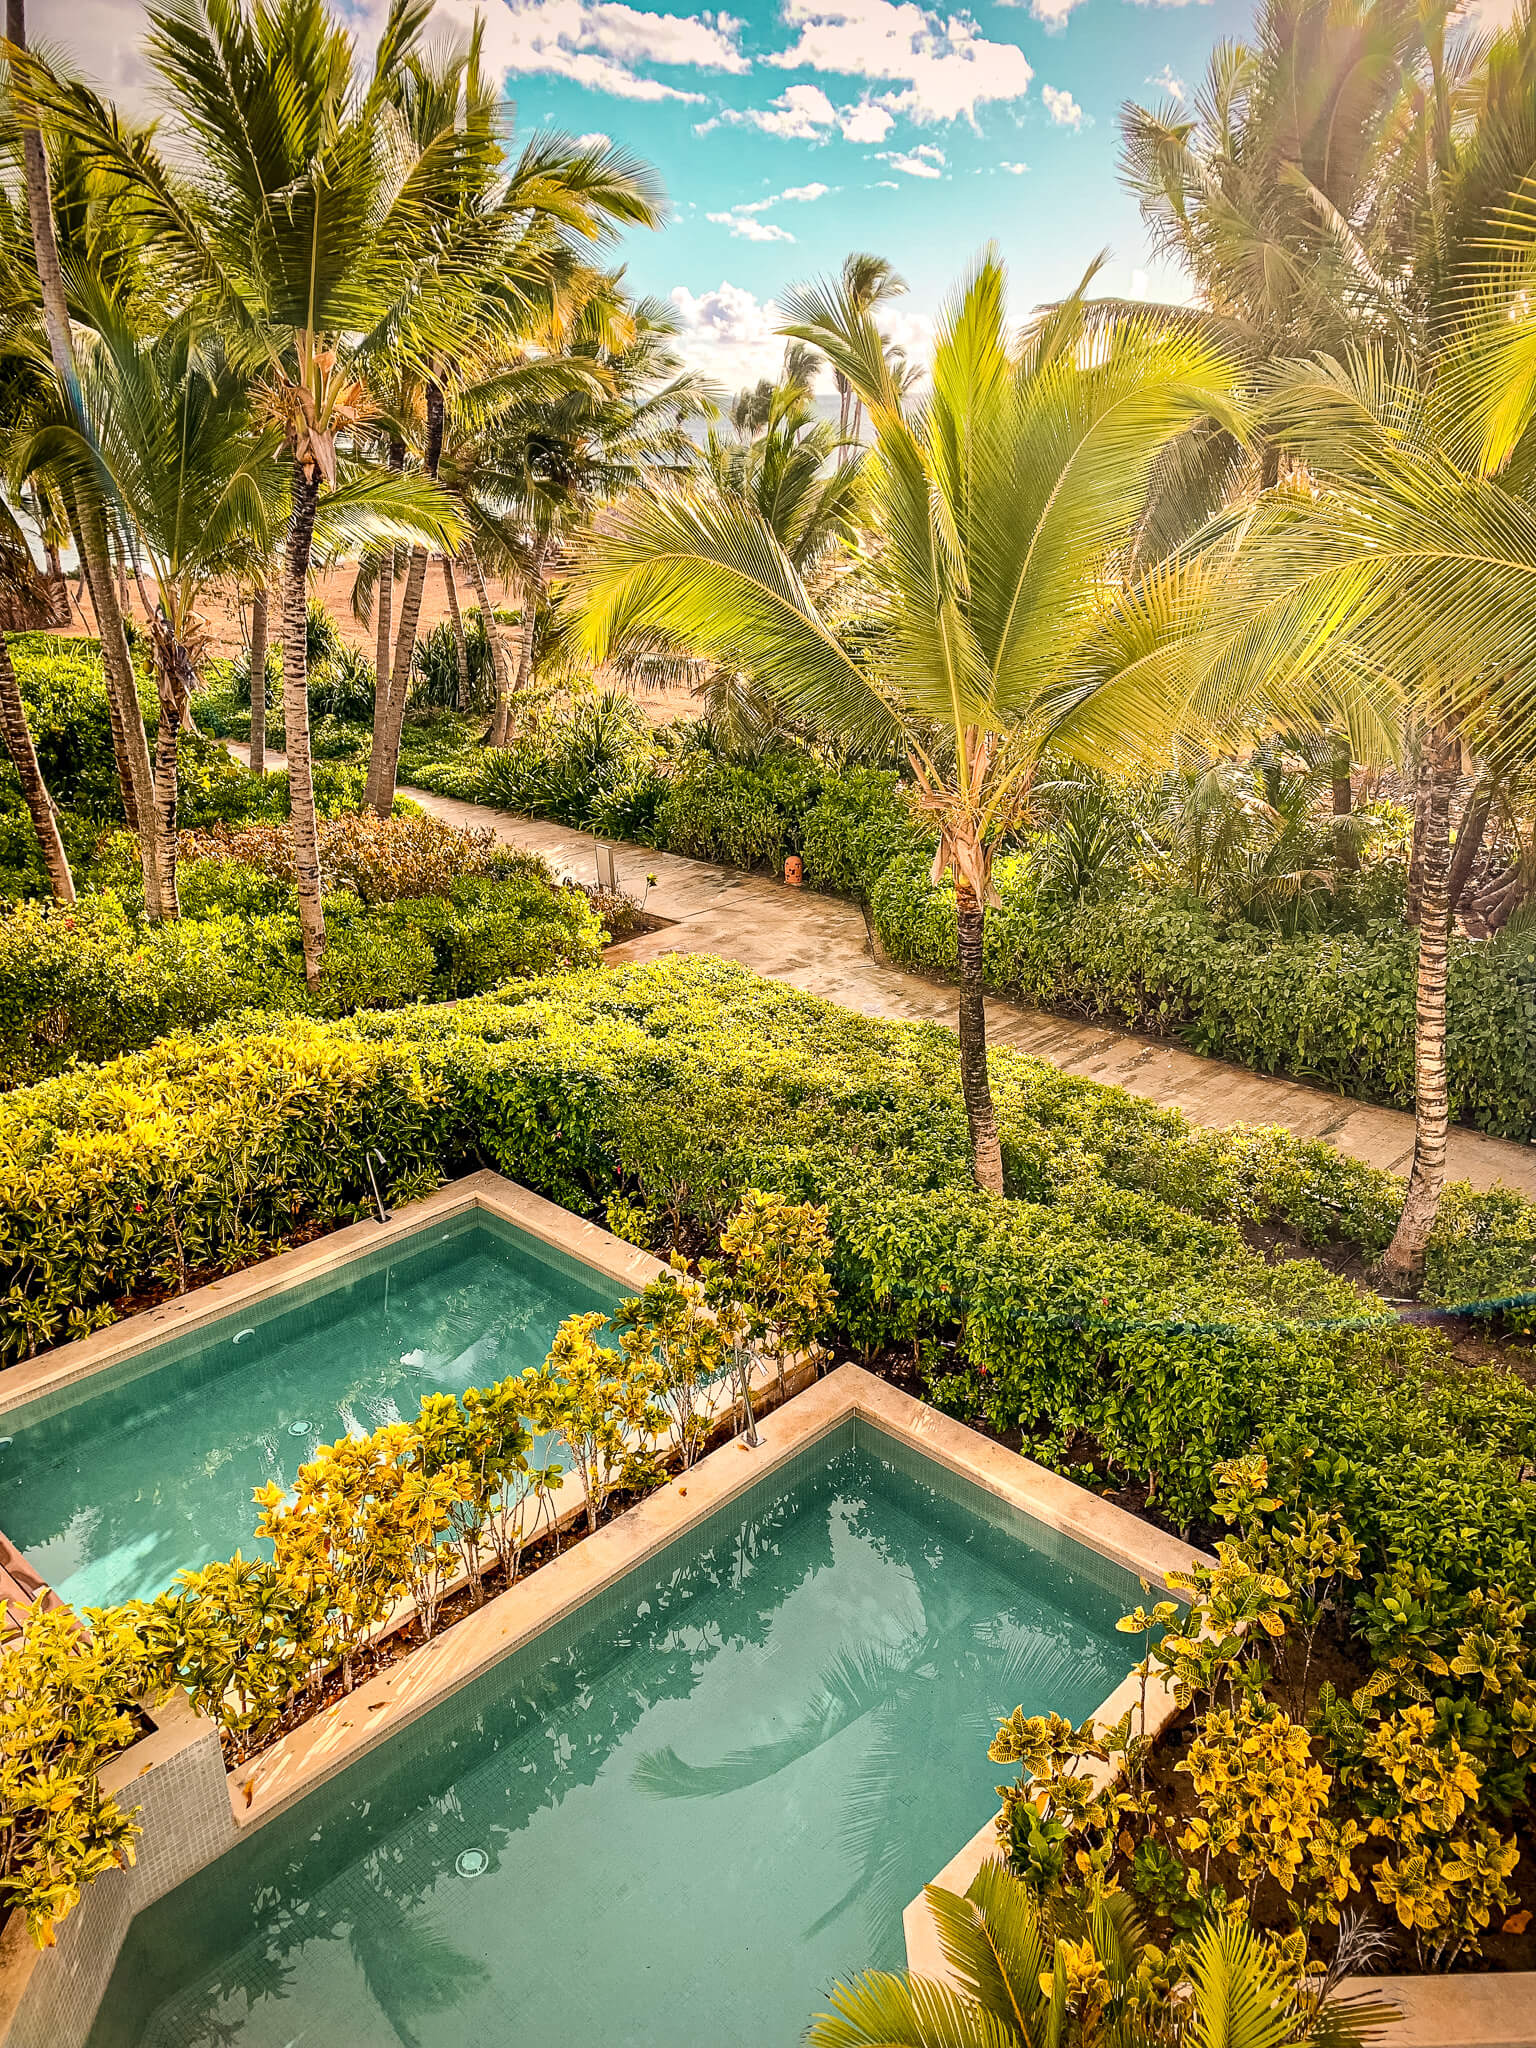 Private pools surrounded by green shrubs and palm trees with the beach in the background